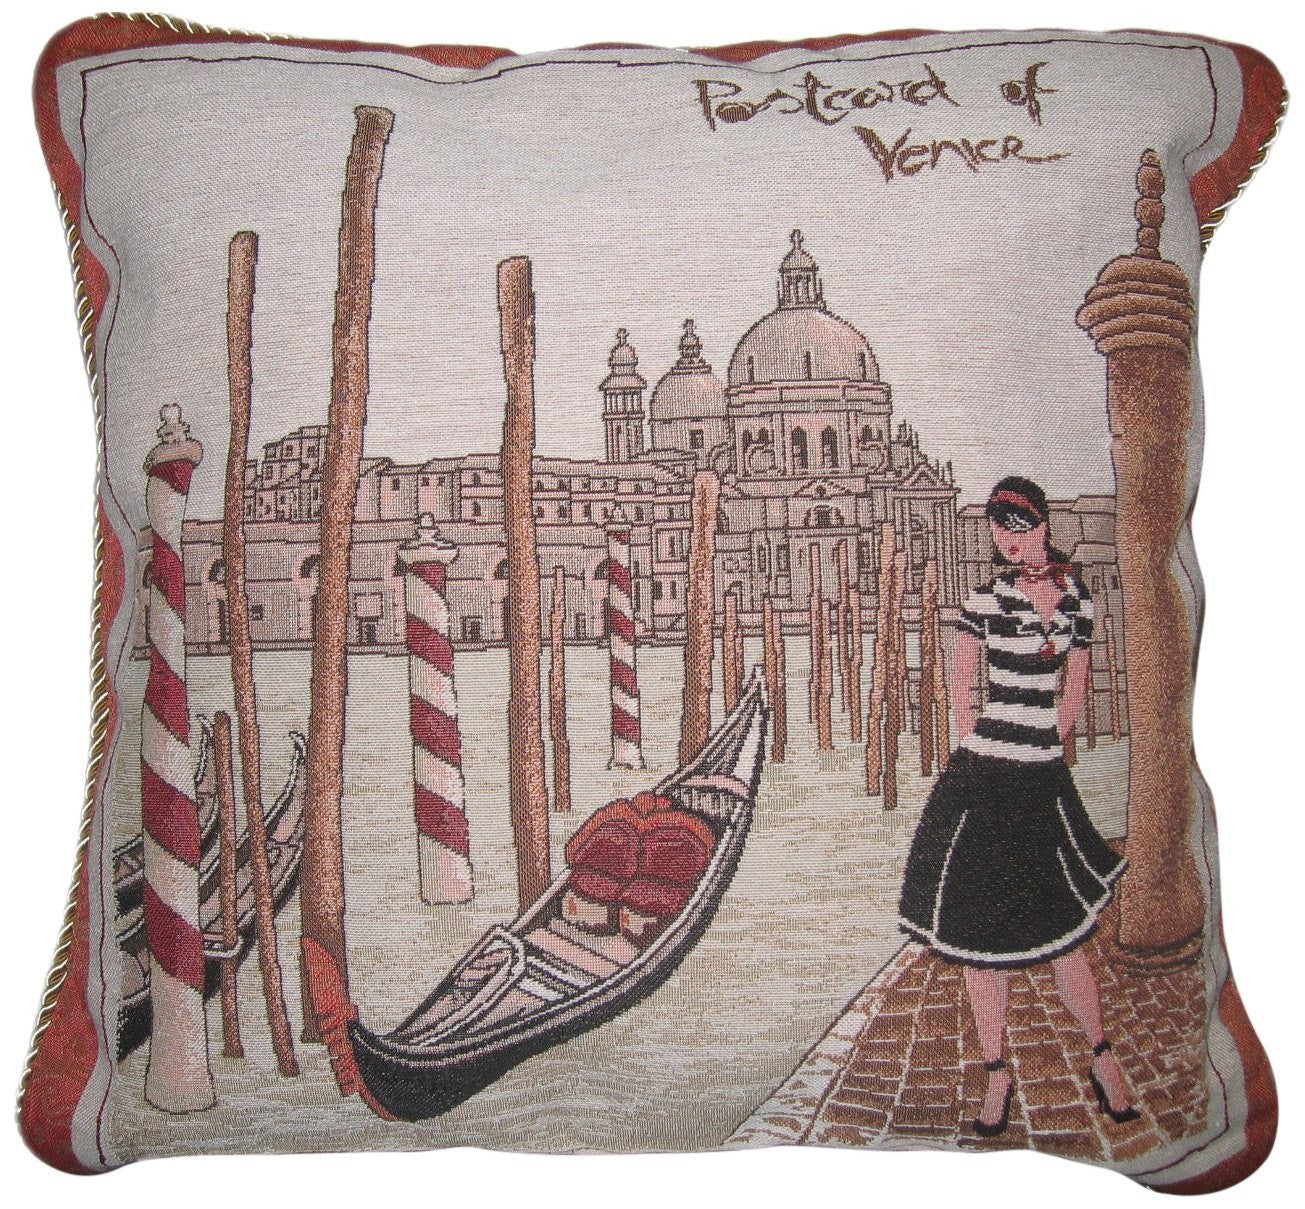 Postcard of Venice Europe Italy Boat Gondola Castle Elegant Novelty Woven Square Accent Cushion Cover Throw Toss Pillow Case- 1-Piece - 18" - Stores Basement - Discount Bedding